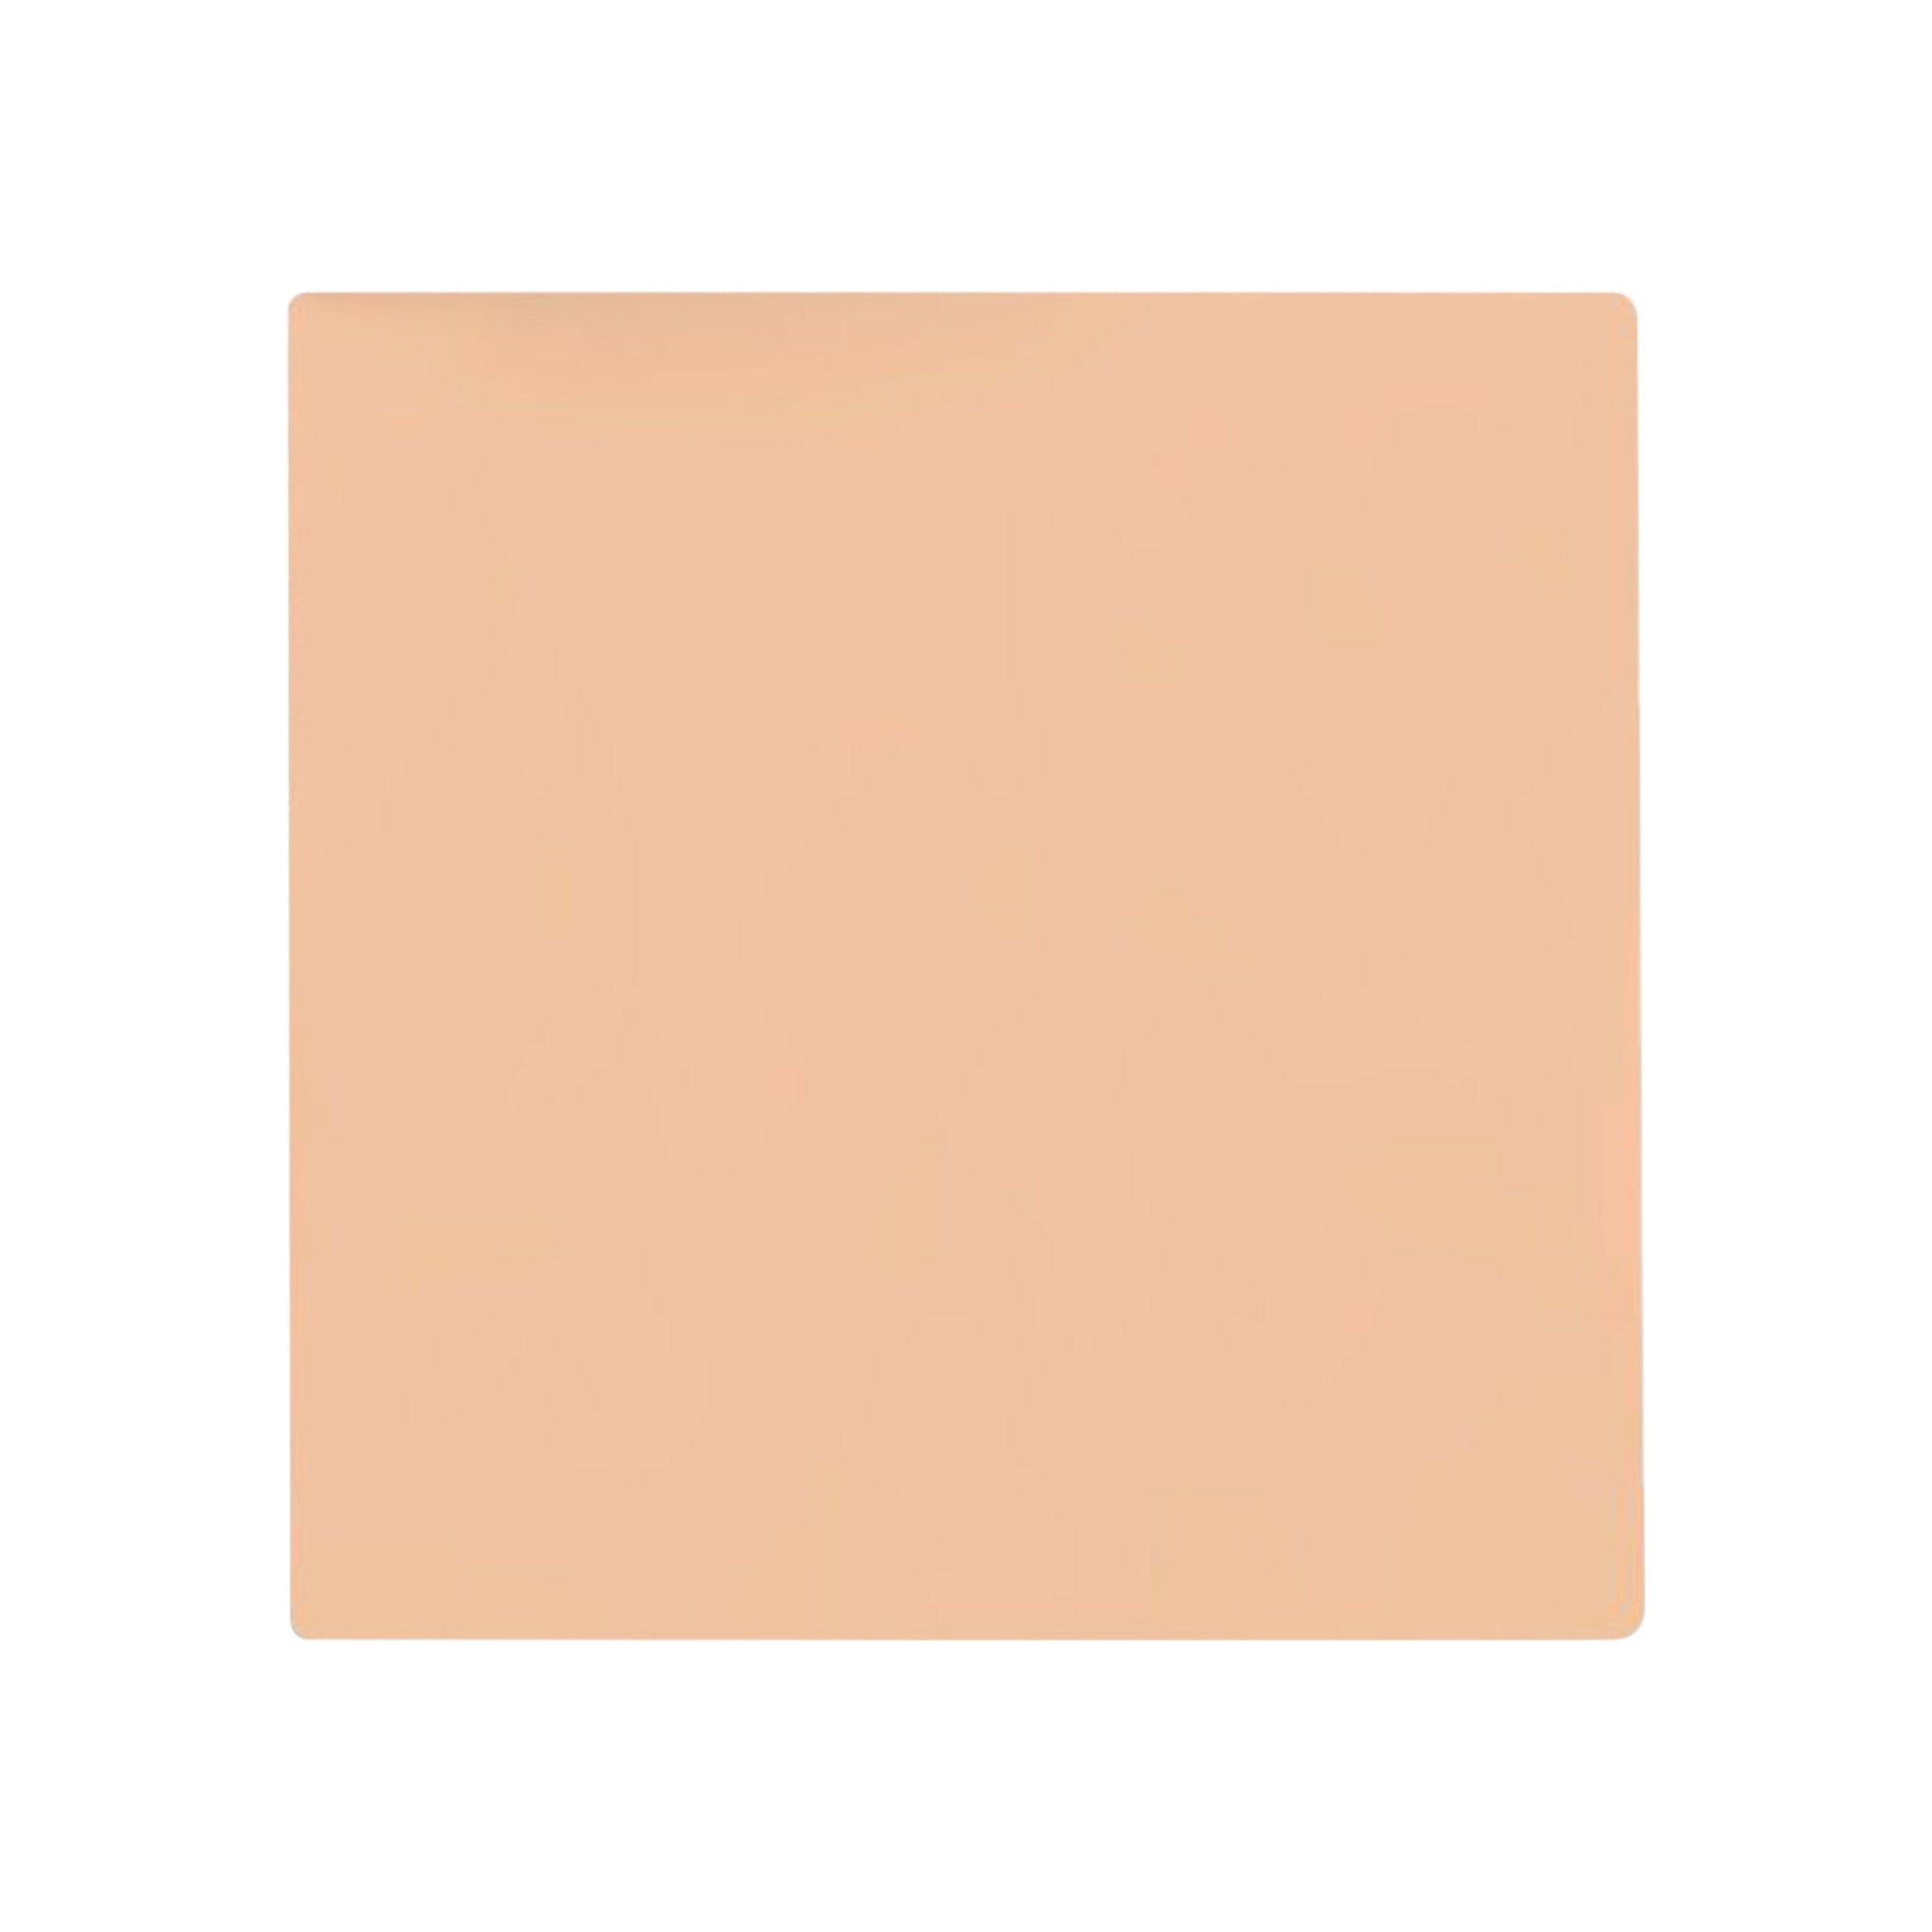 Kjaer Weis Cream Foundation Refill Color/Shade variant: Like Porcelain main image. This product is for light warm neutral beige complexions